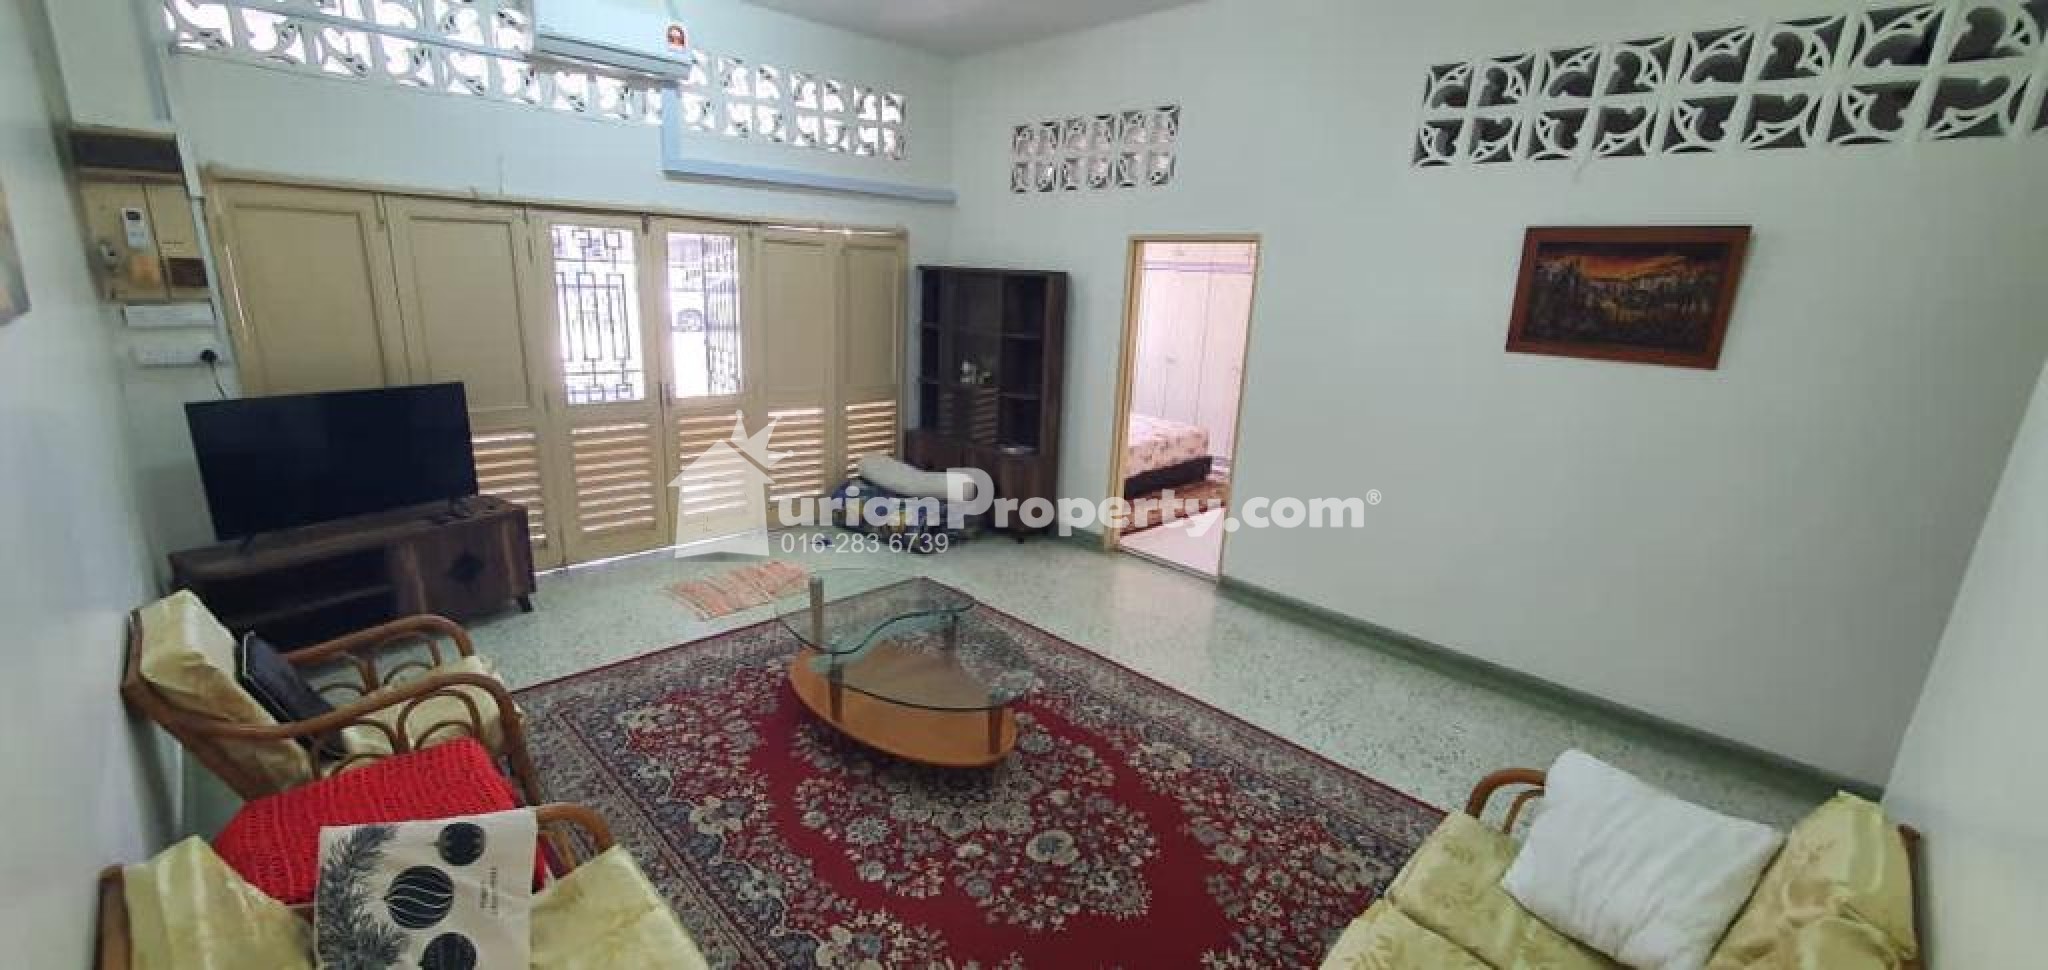 Terrace House For Sale at Jalan Ipoh